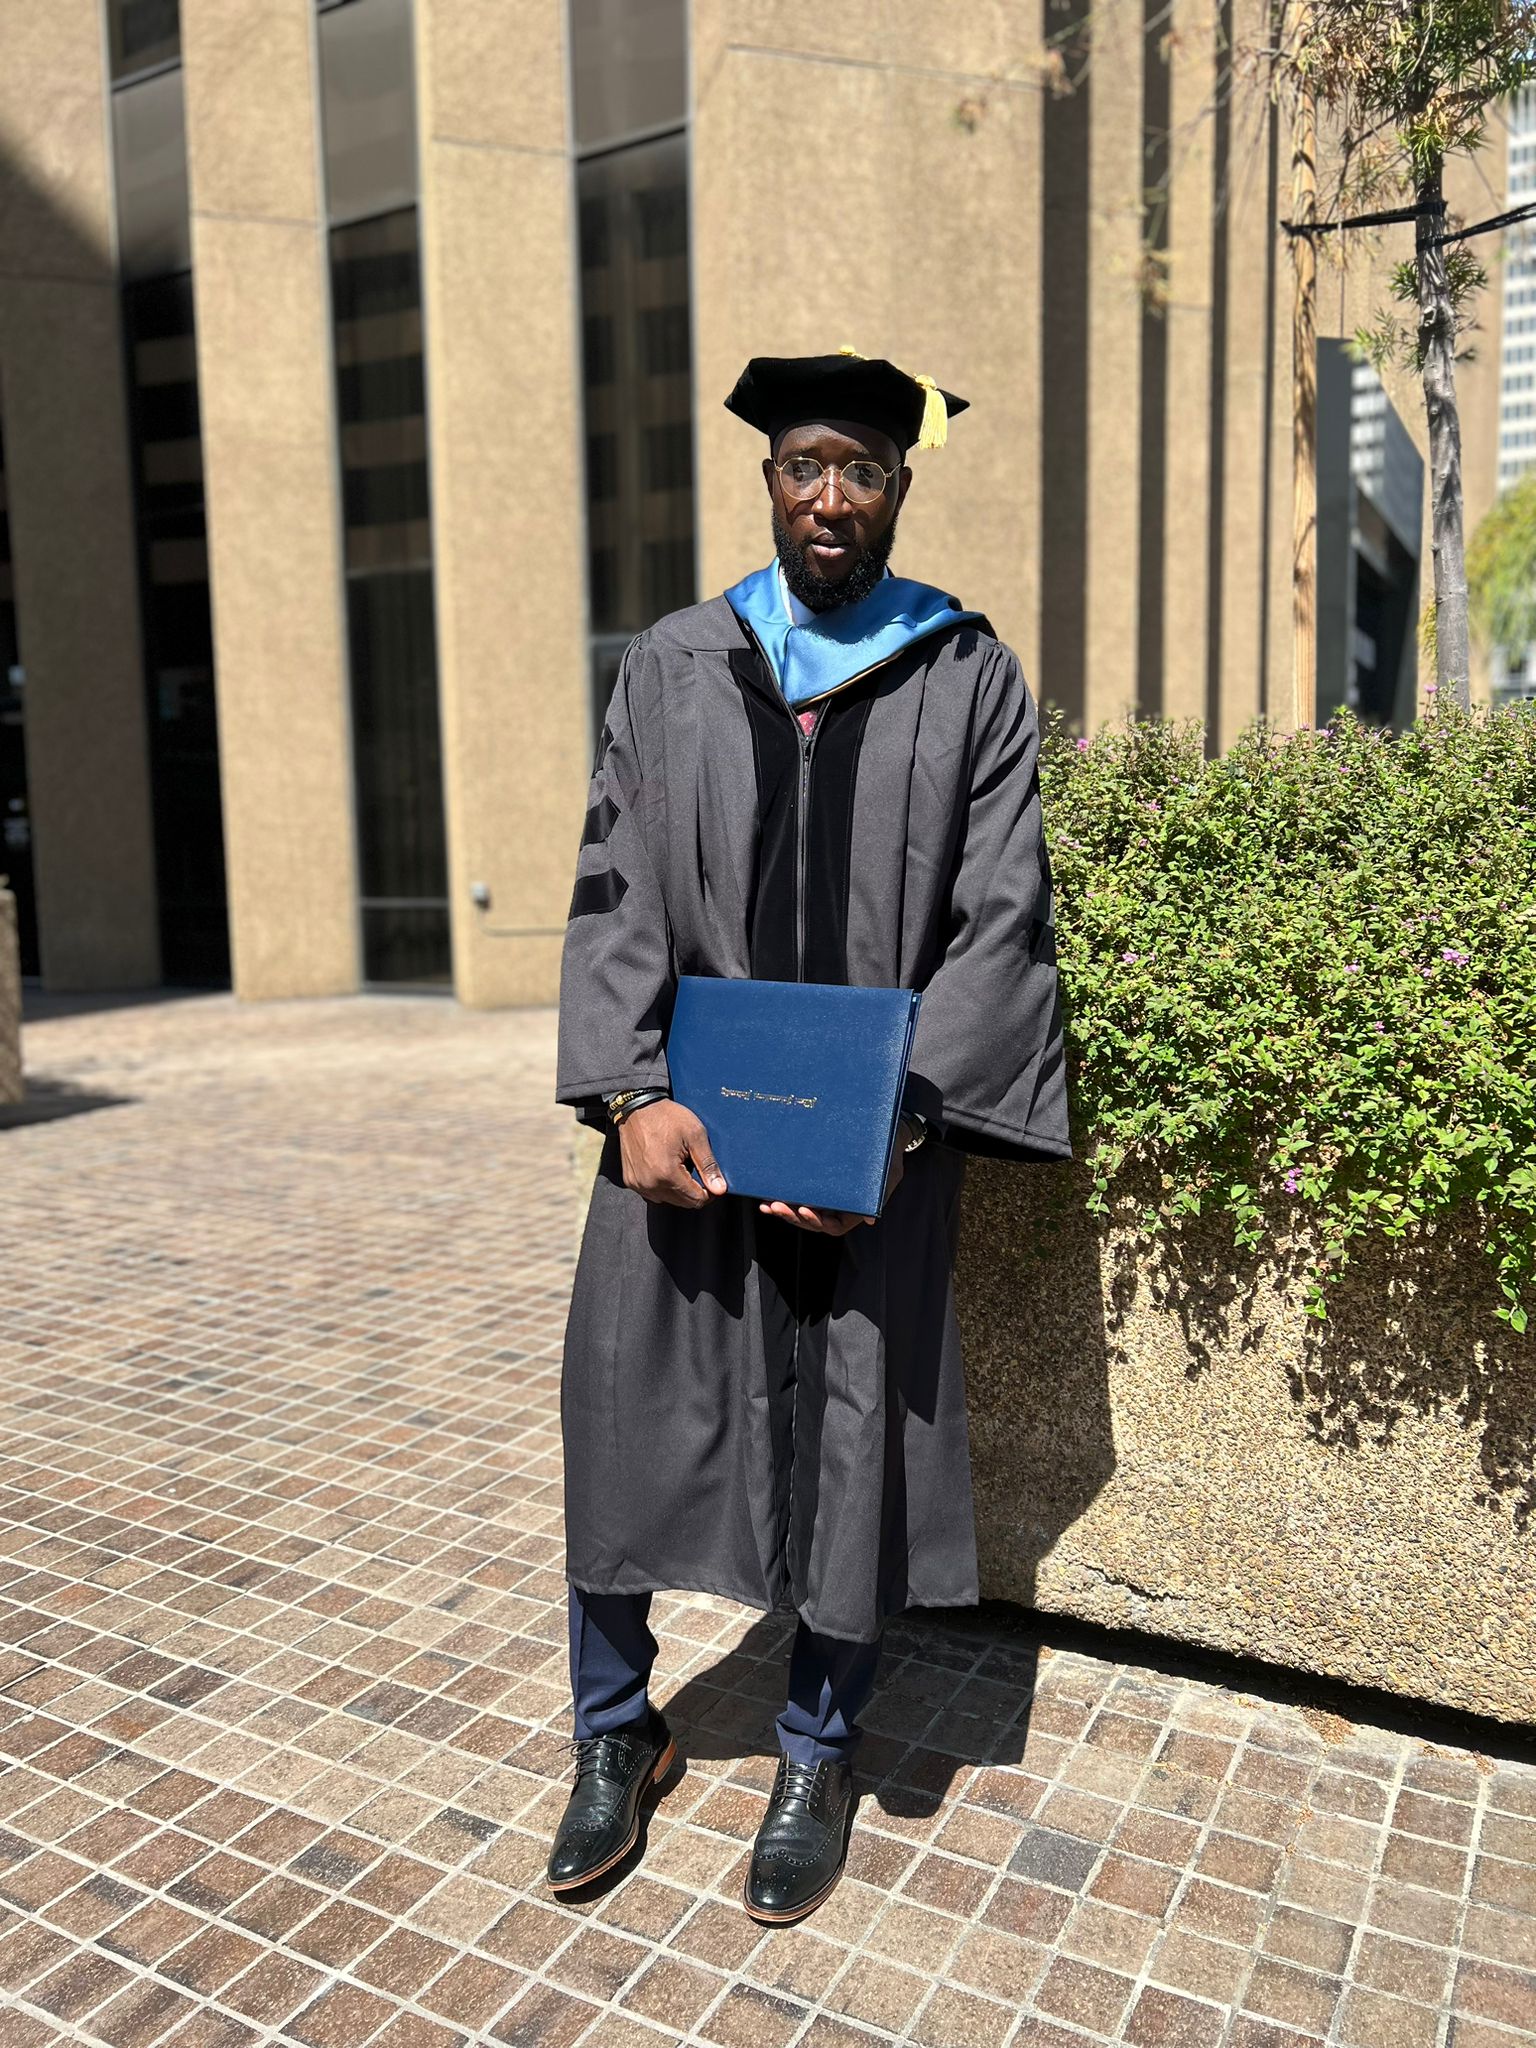 Prince of Ogulagha kingdom earns another academic Laurel, bags PhD from US University at 30